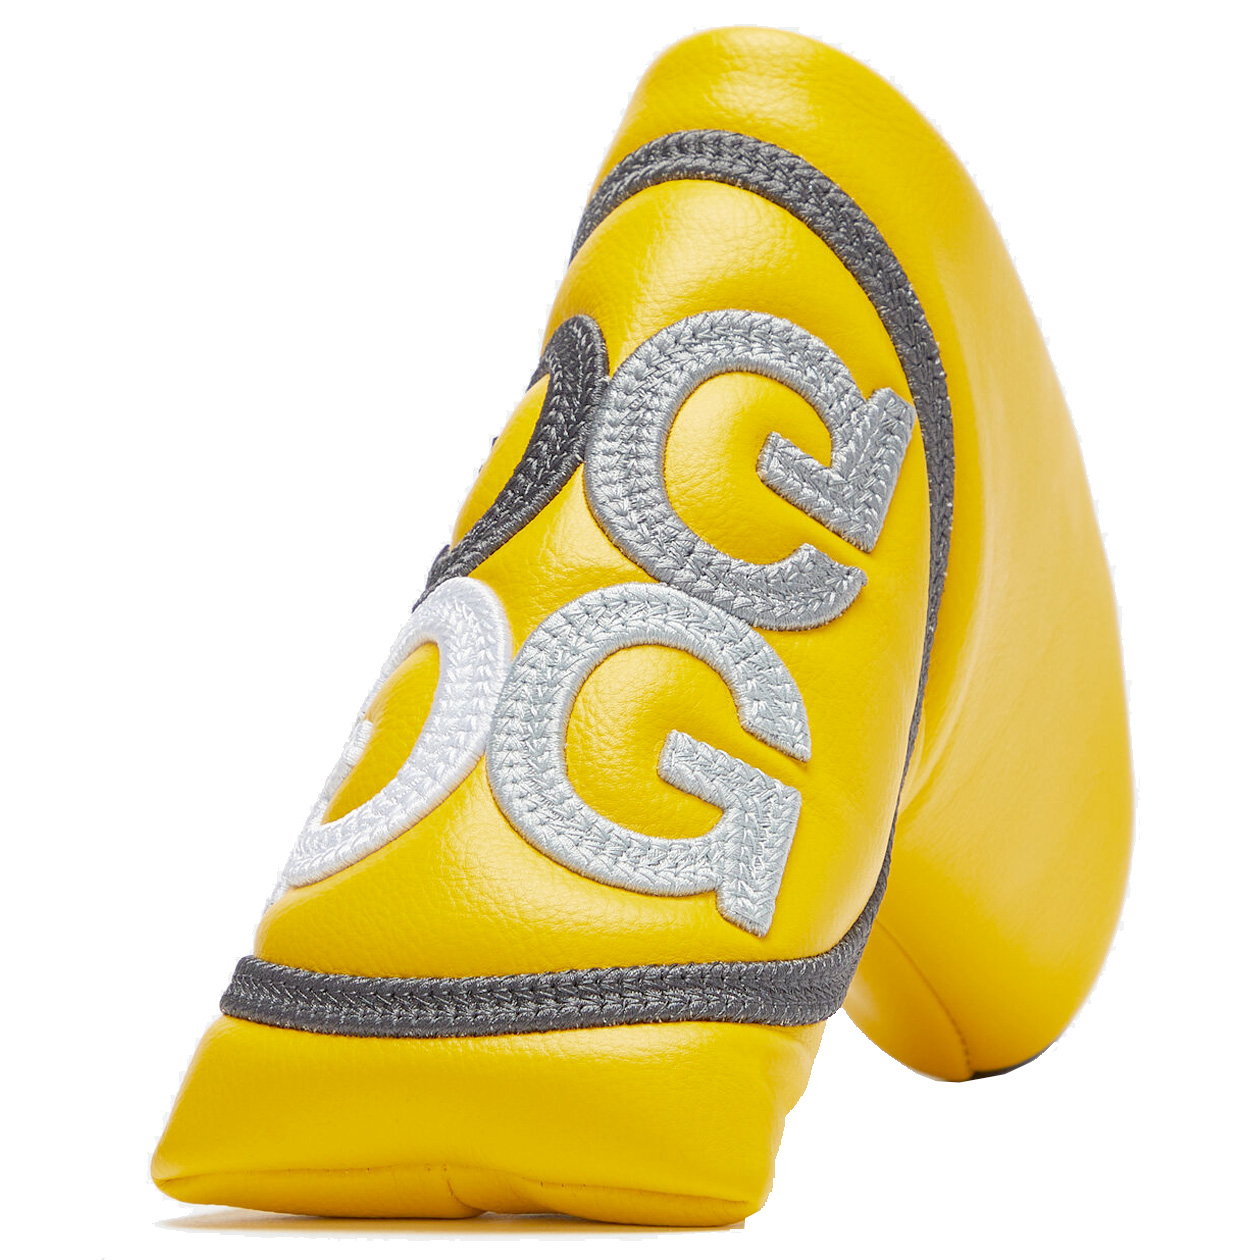 G/FORE Gradient Circle G’S Blade Putter Headcover